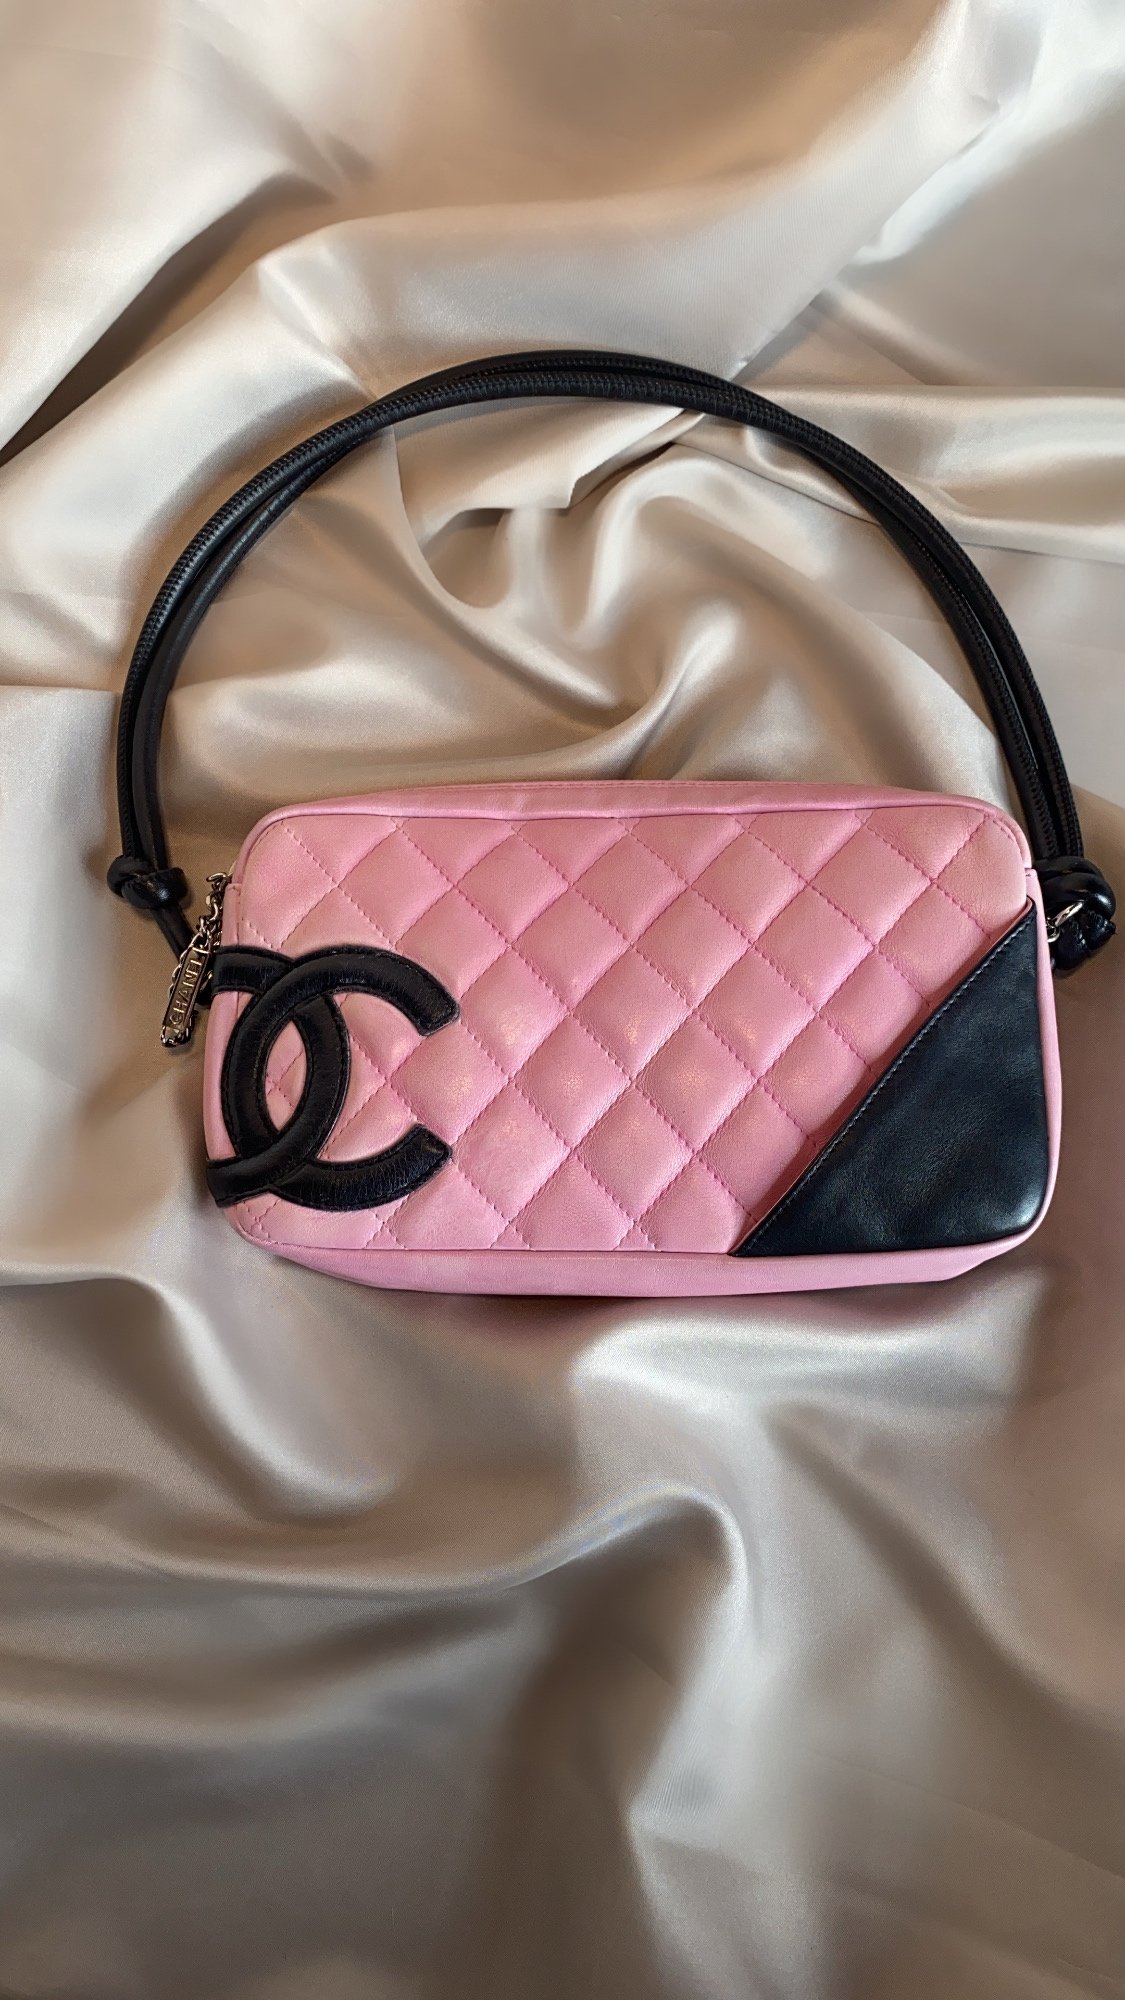 Chanel Tote Cambon Quilted Ligne Large Flap Black Leather Shoulder